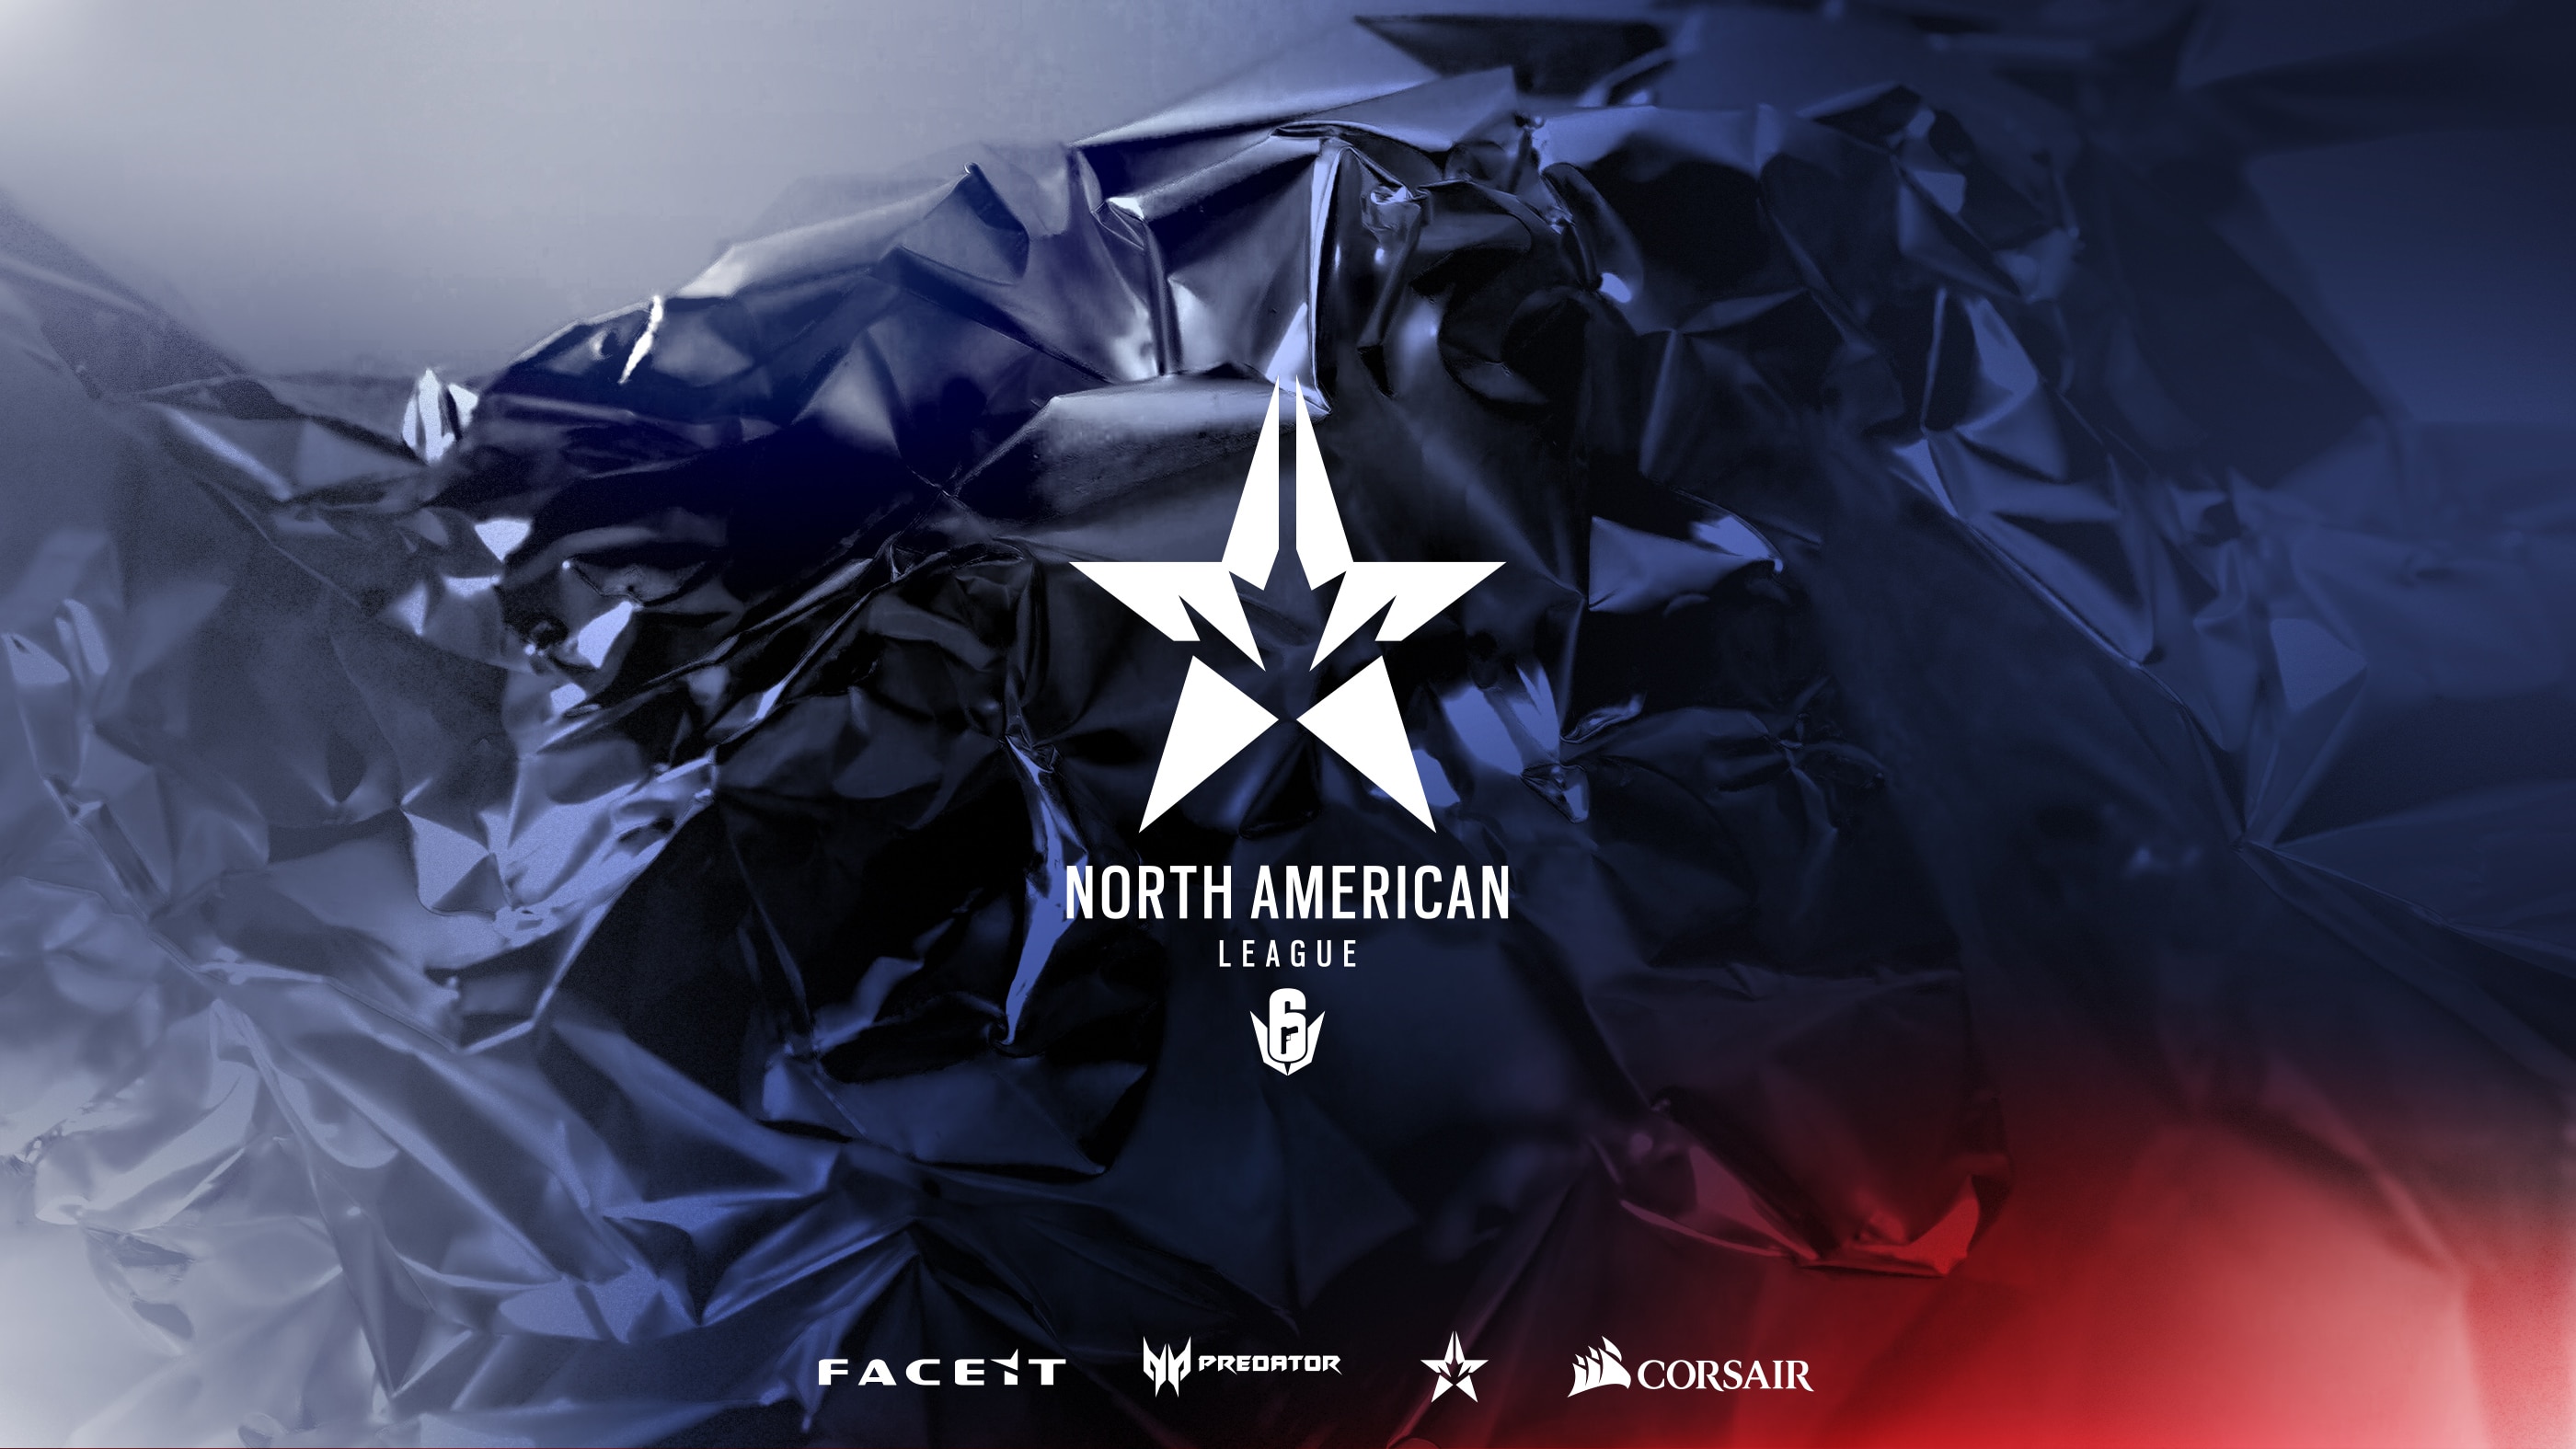 STAGE 2 OF THE NORTH AMERICAN LEAGUE IS HERE